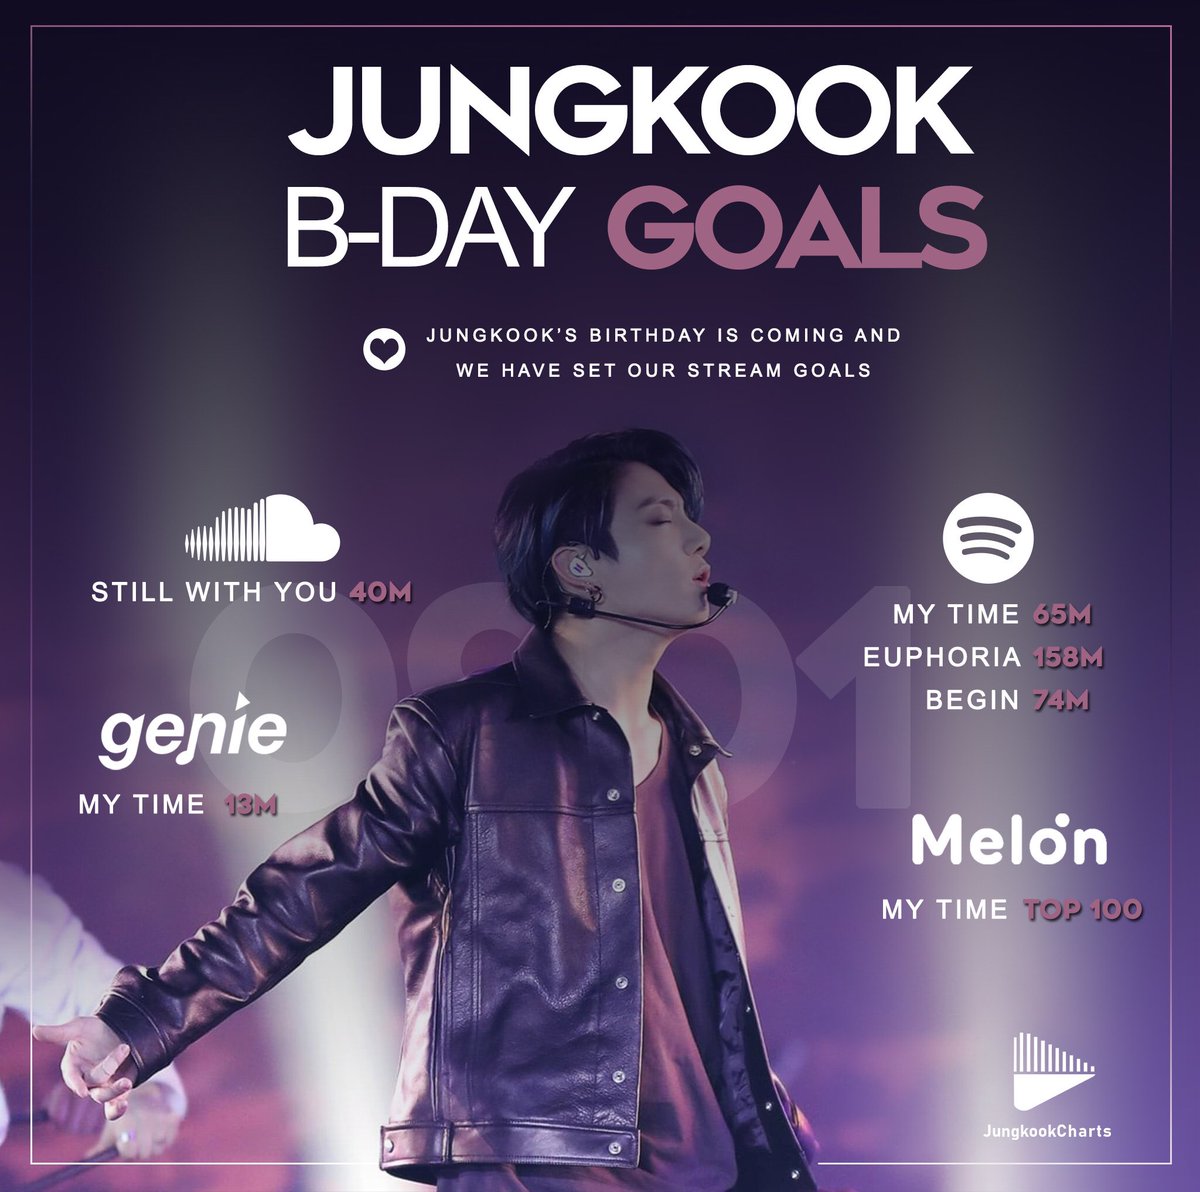 Jungkook's birthday is coming up and like every year I set stream goals as a gift for him. Please let us work hard to fulfill them and enjoy his birthday in the best possible way. Give an RT to spread the word!